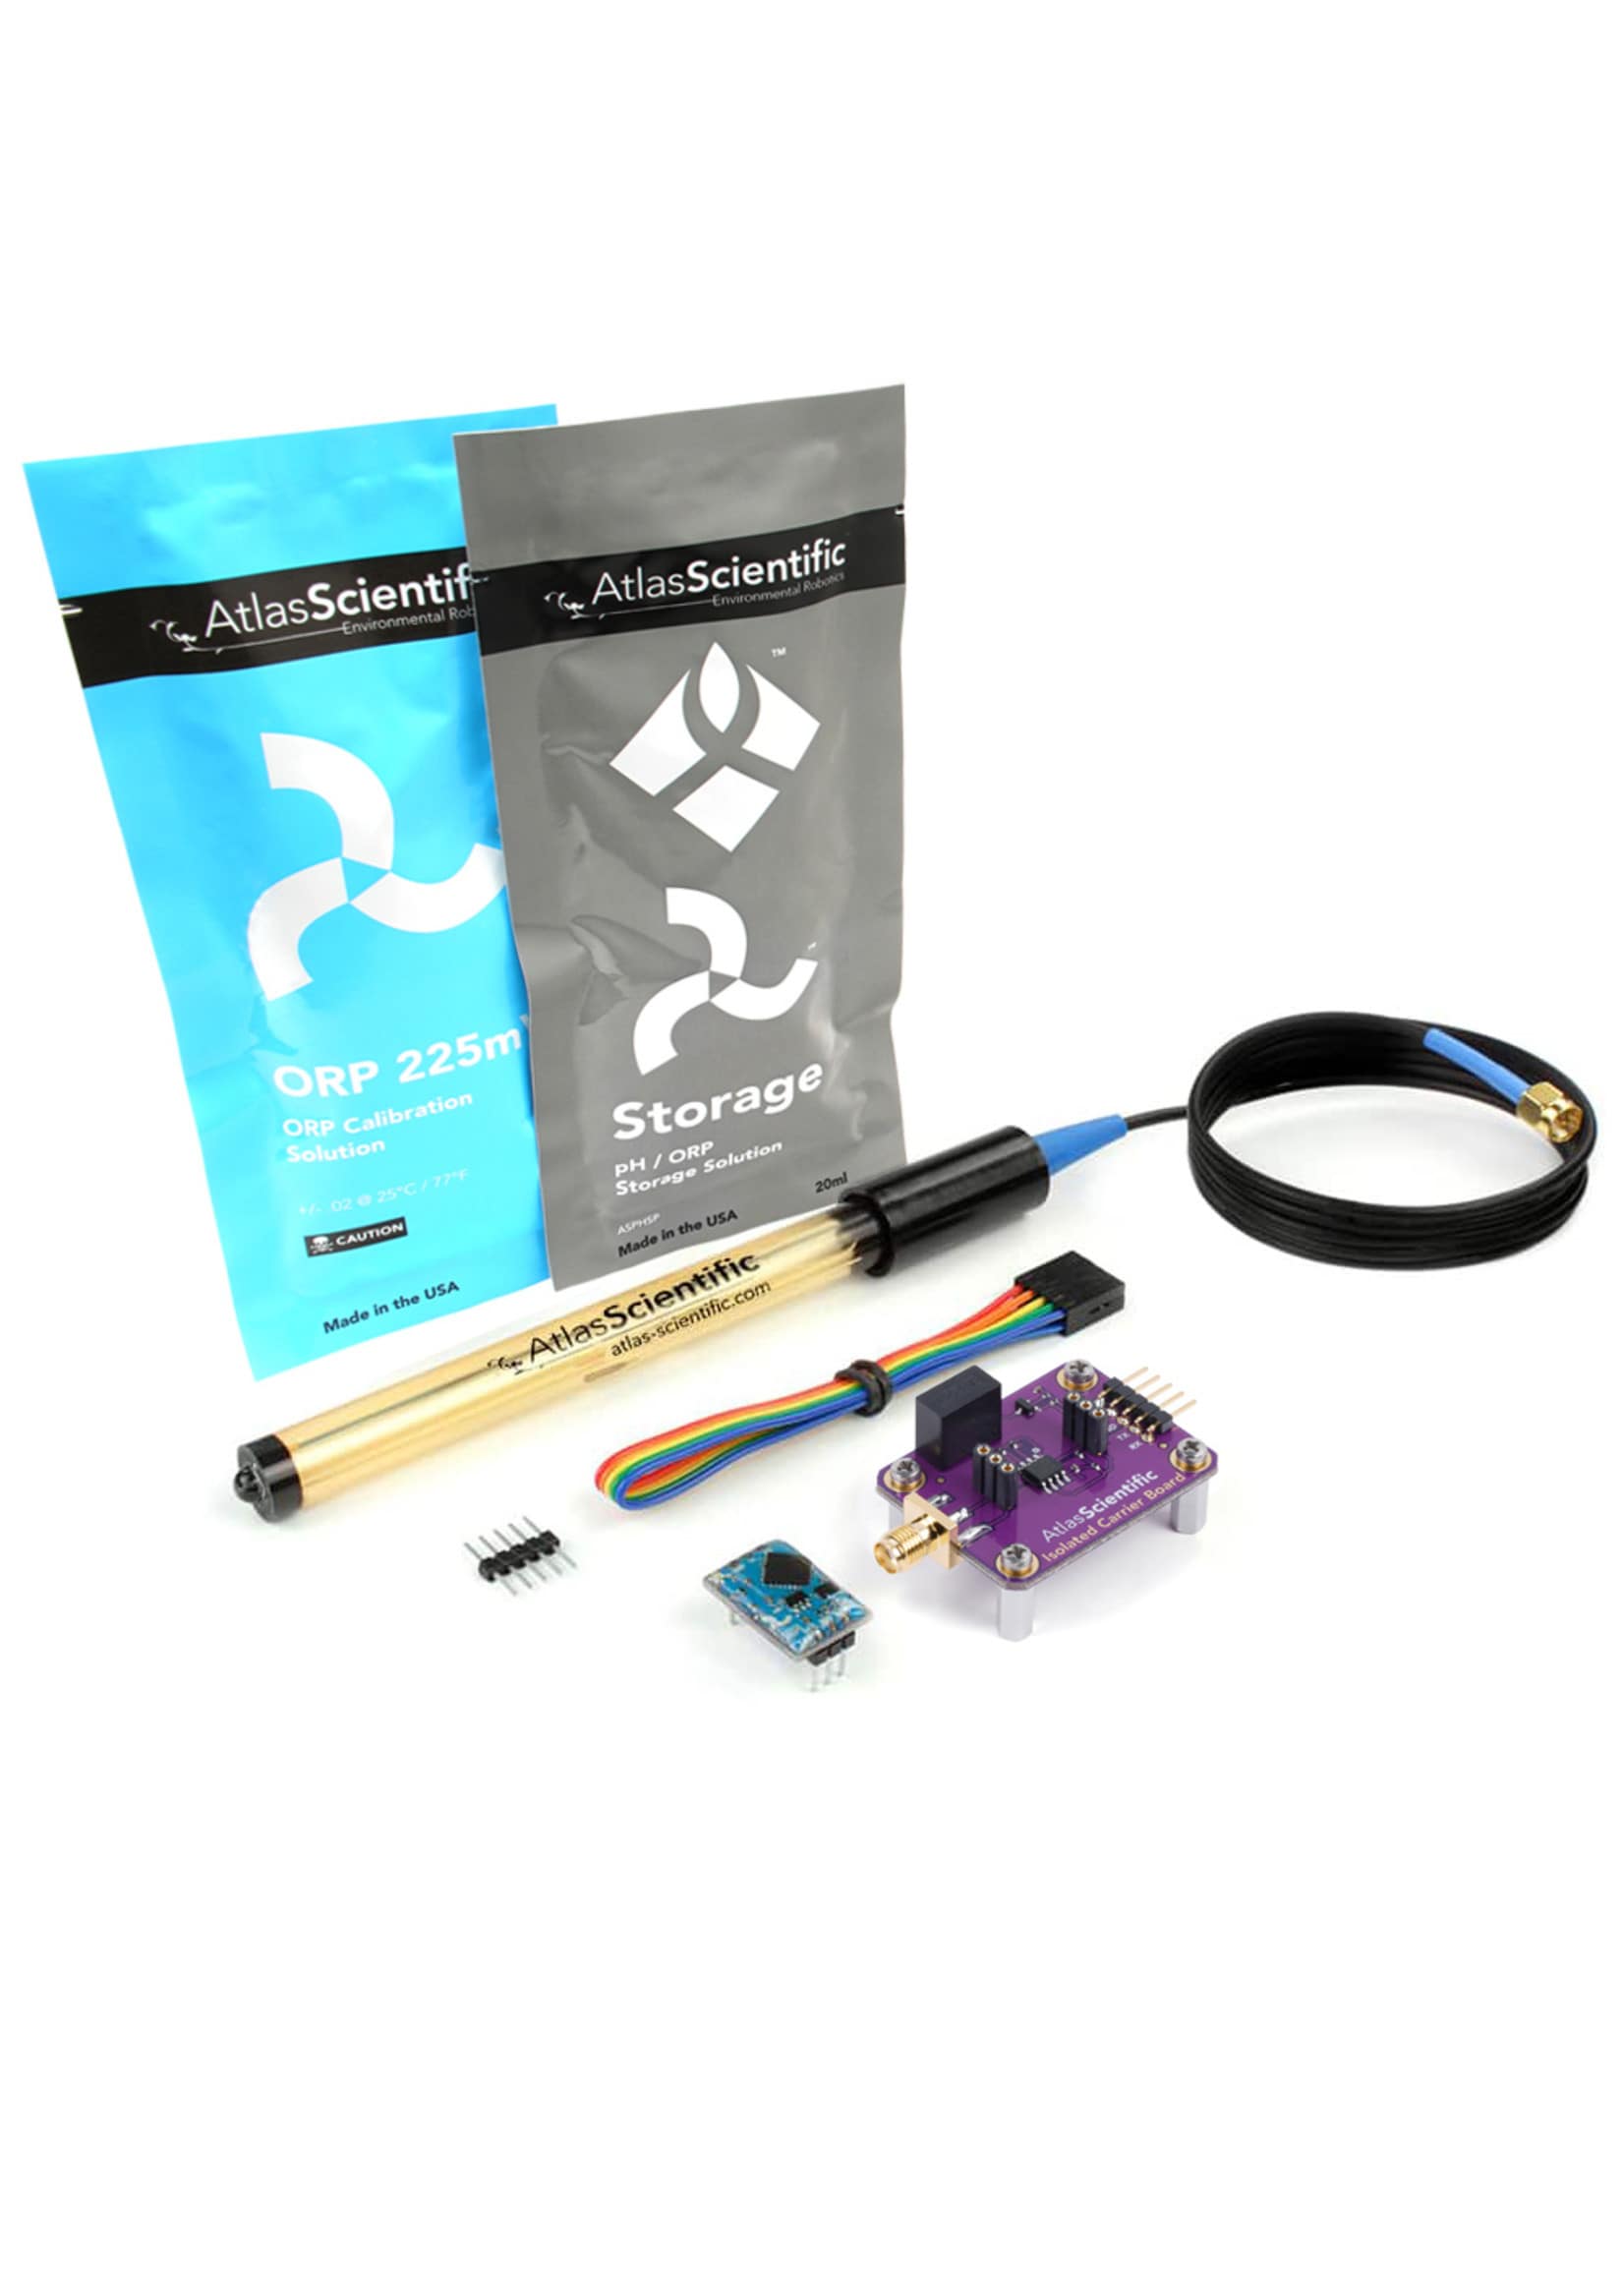 All products included in the ORP Probe Kit